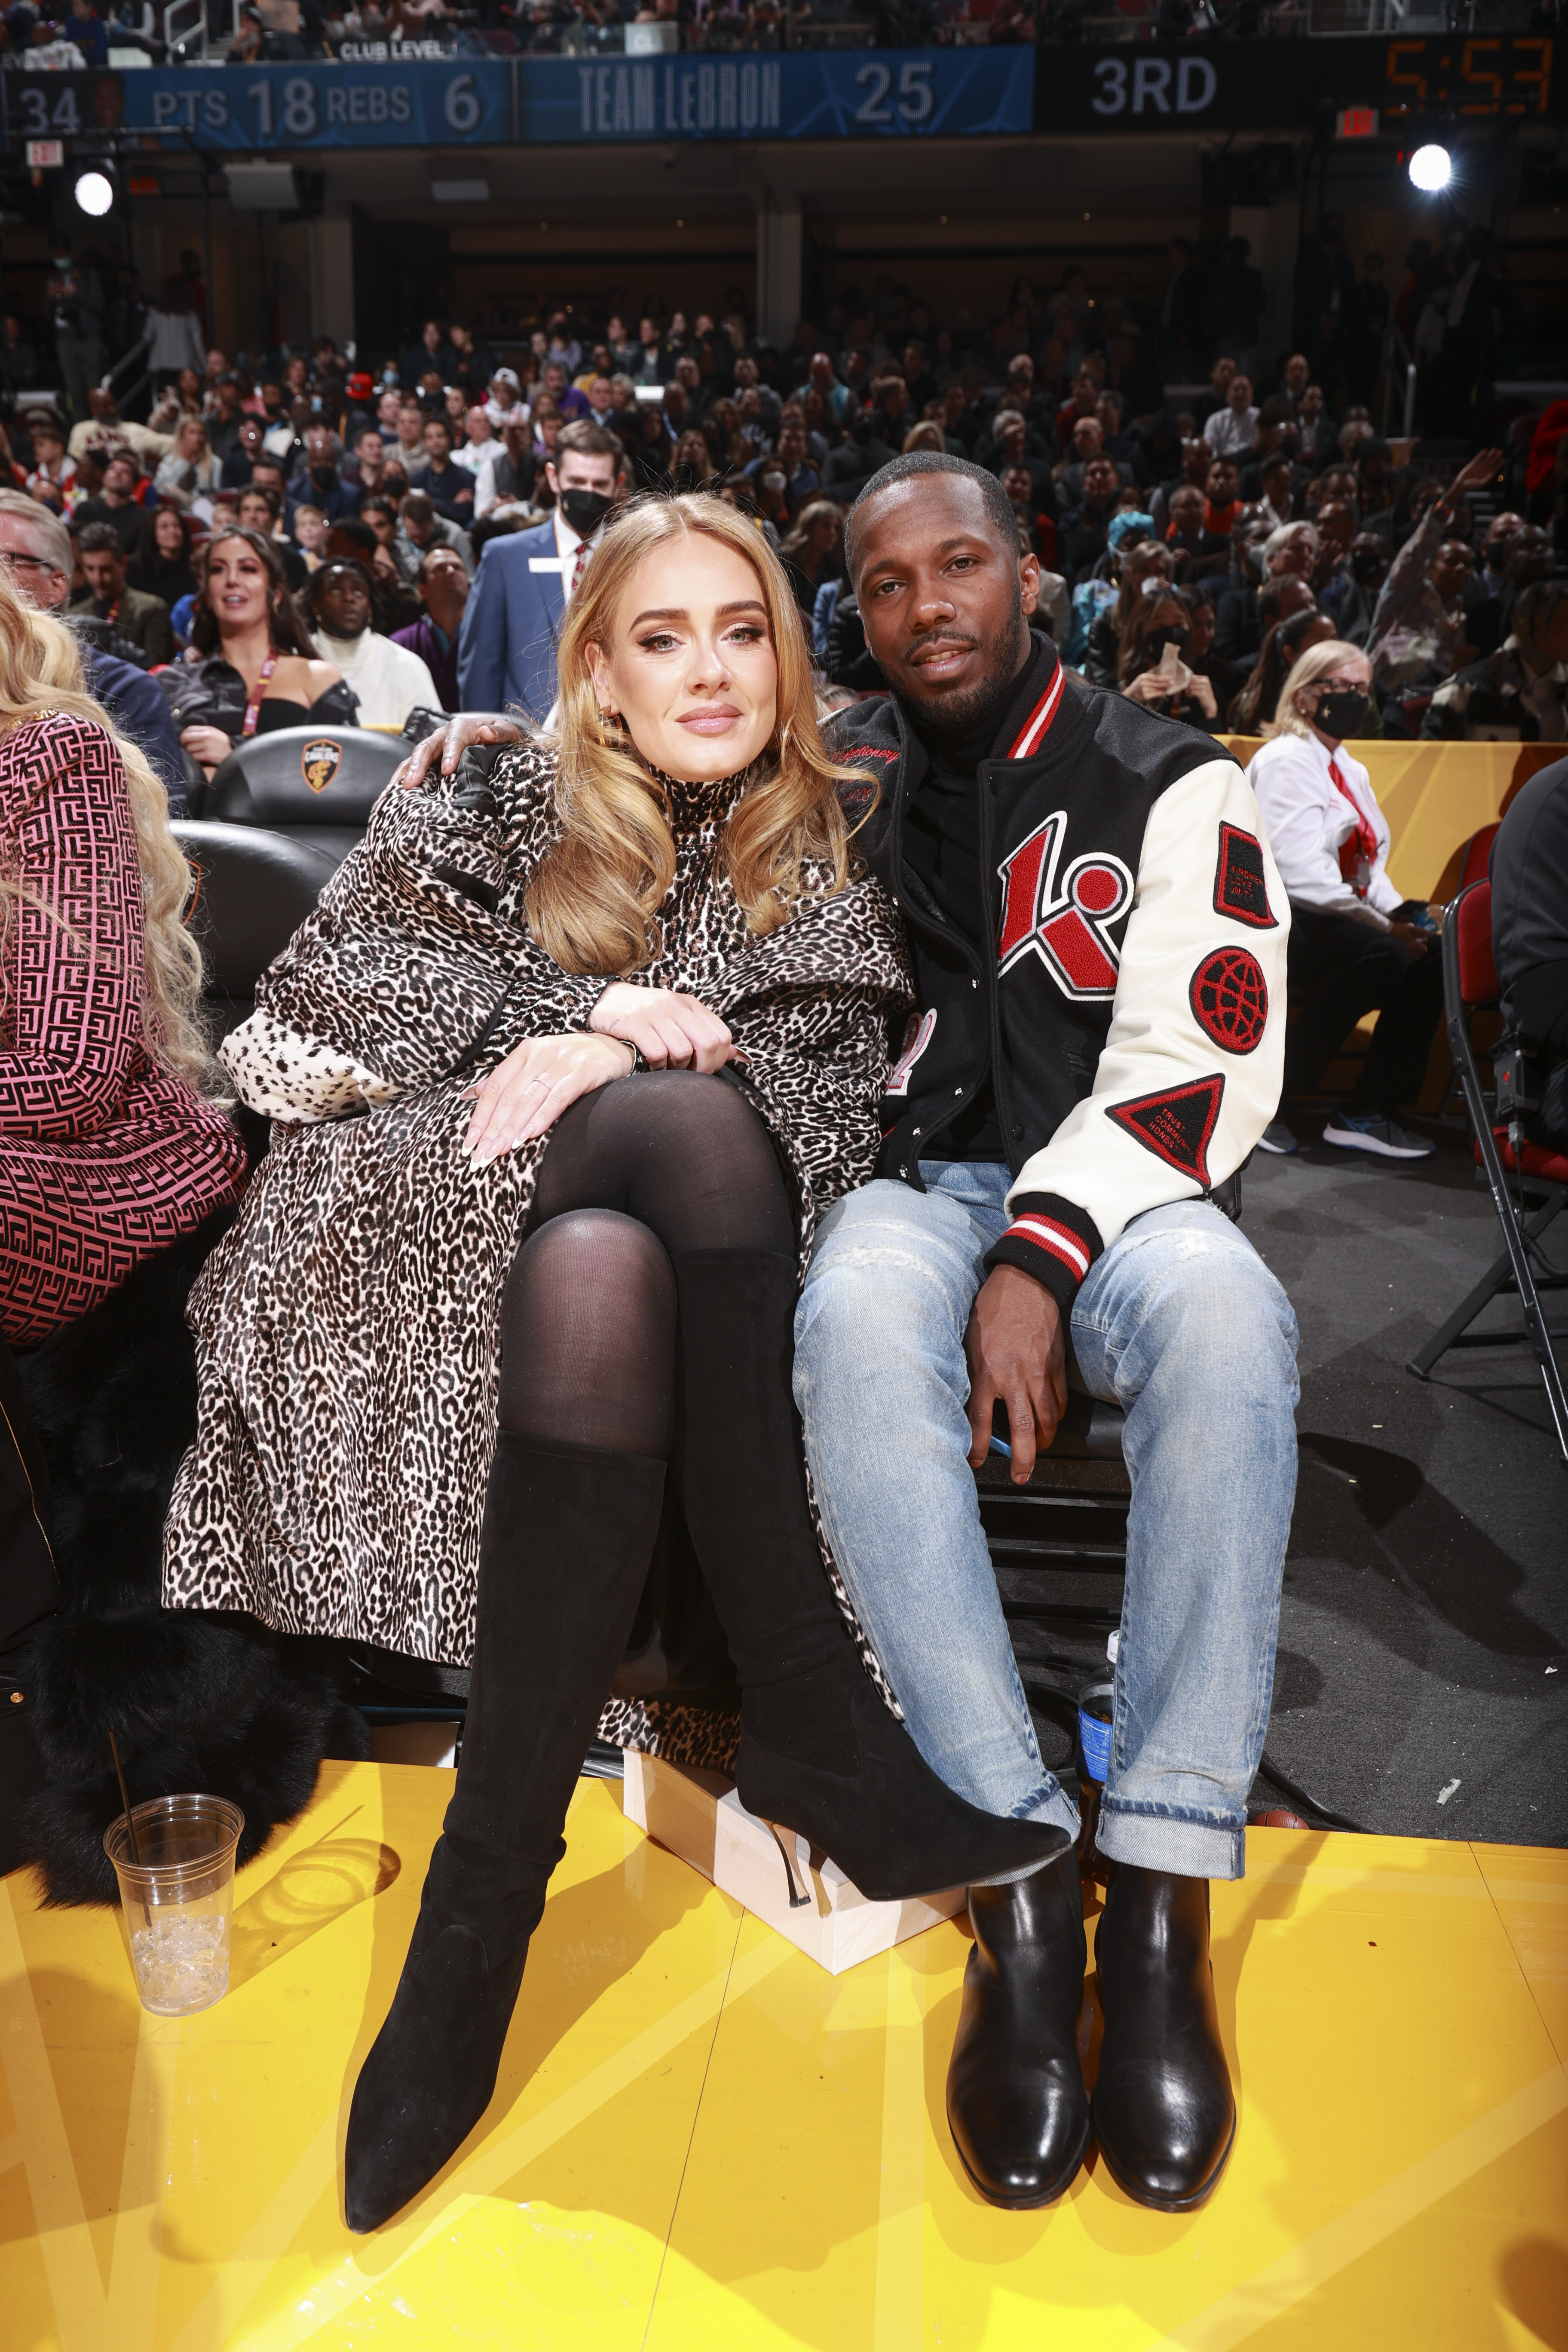 Adele and Rich Paul during the NBA All-Star Game in Cleveland, Ohio on February 20, 2022 | Source: Getty Images